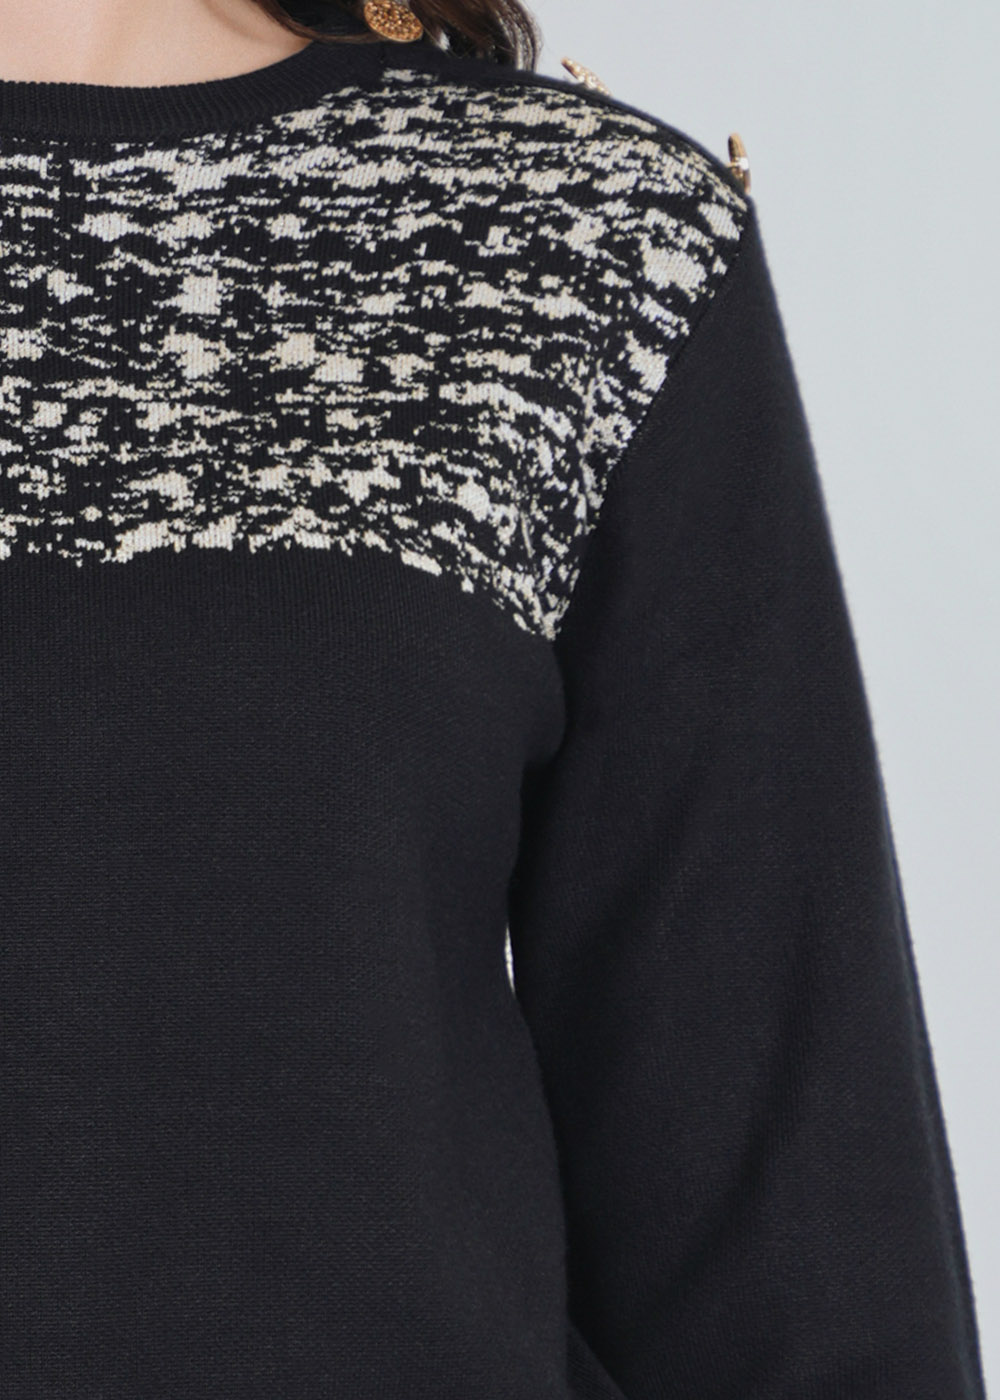 Black Knit Top with White Abstract Details